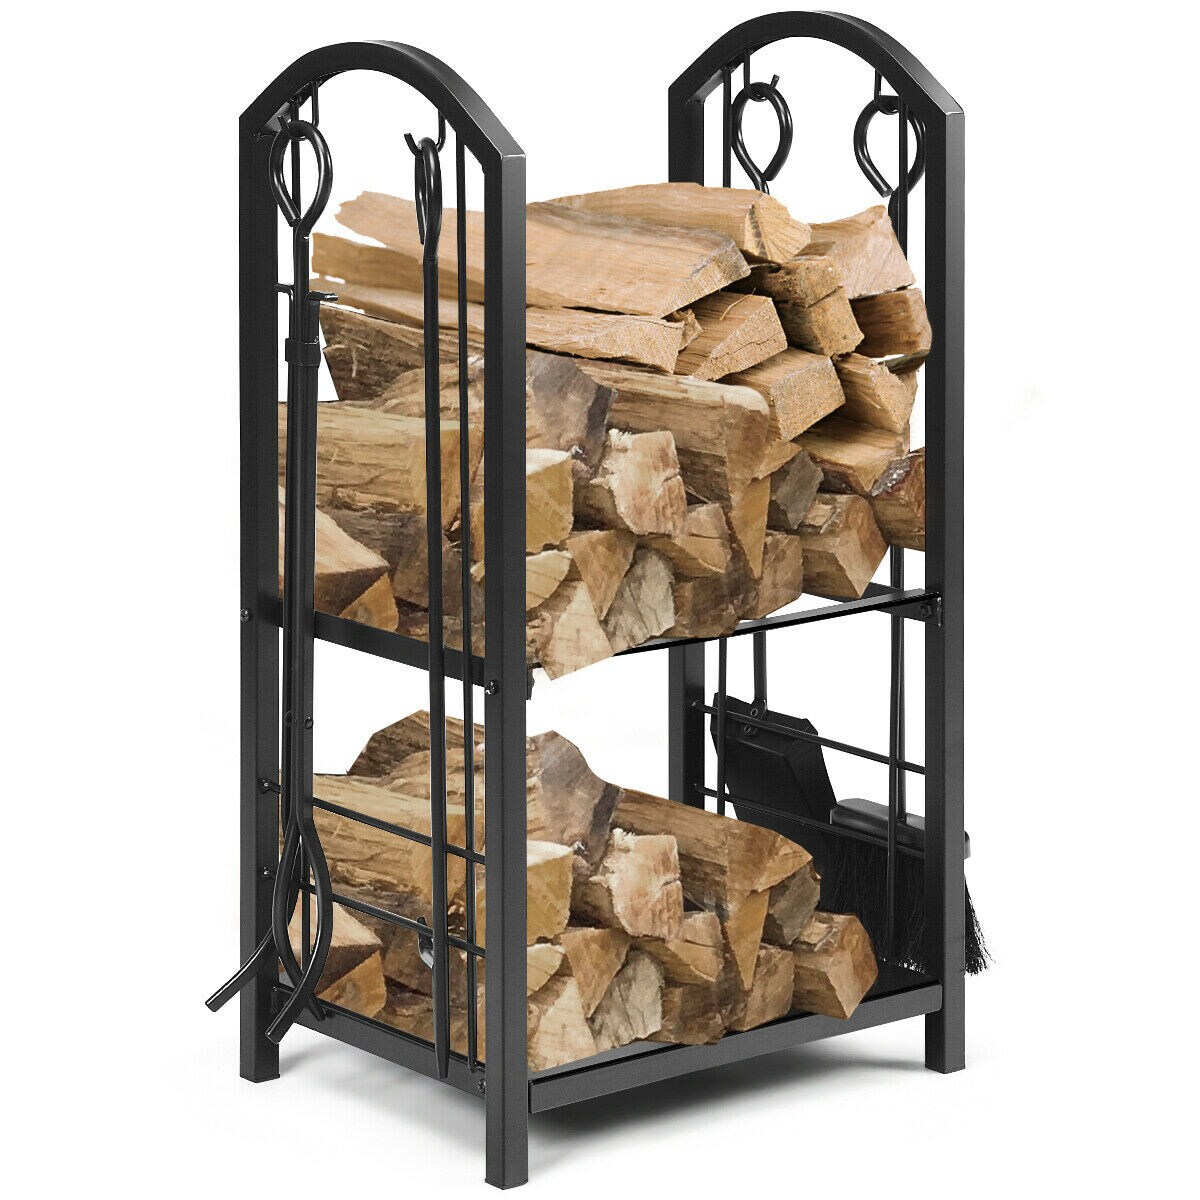 Fire Log Rack Outdoor Firewood Storage Holder Carrier Wrought Iron Black Curved 